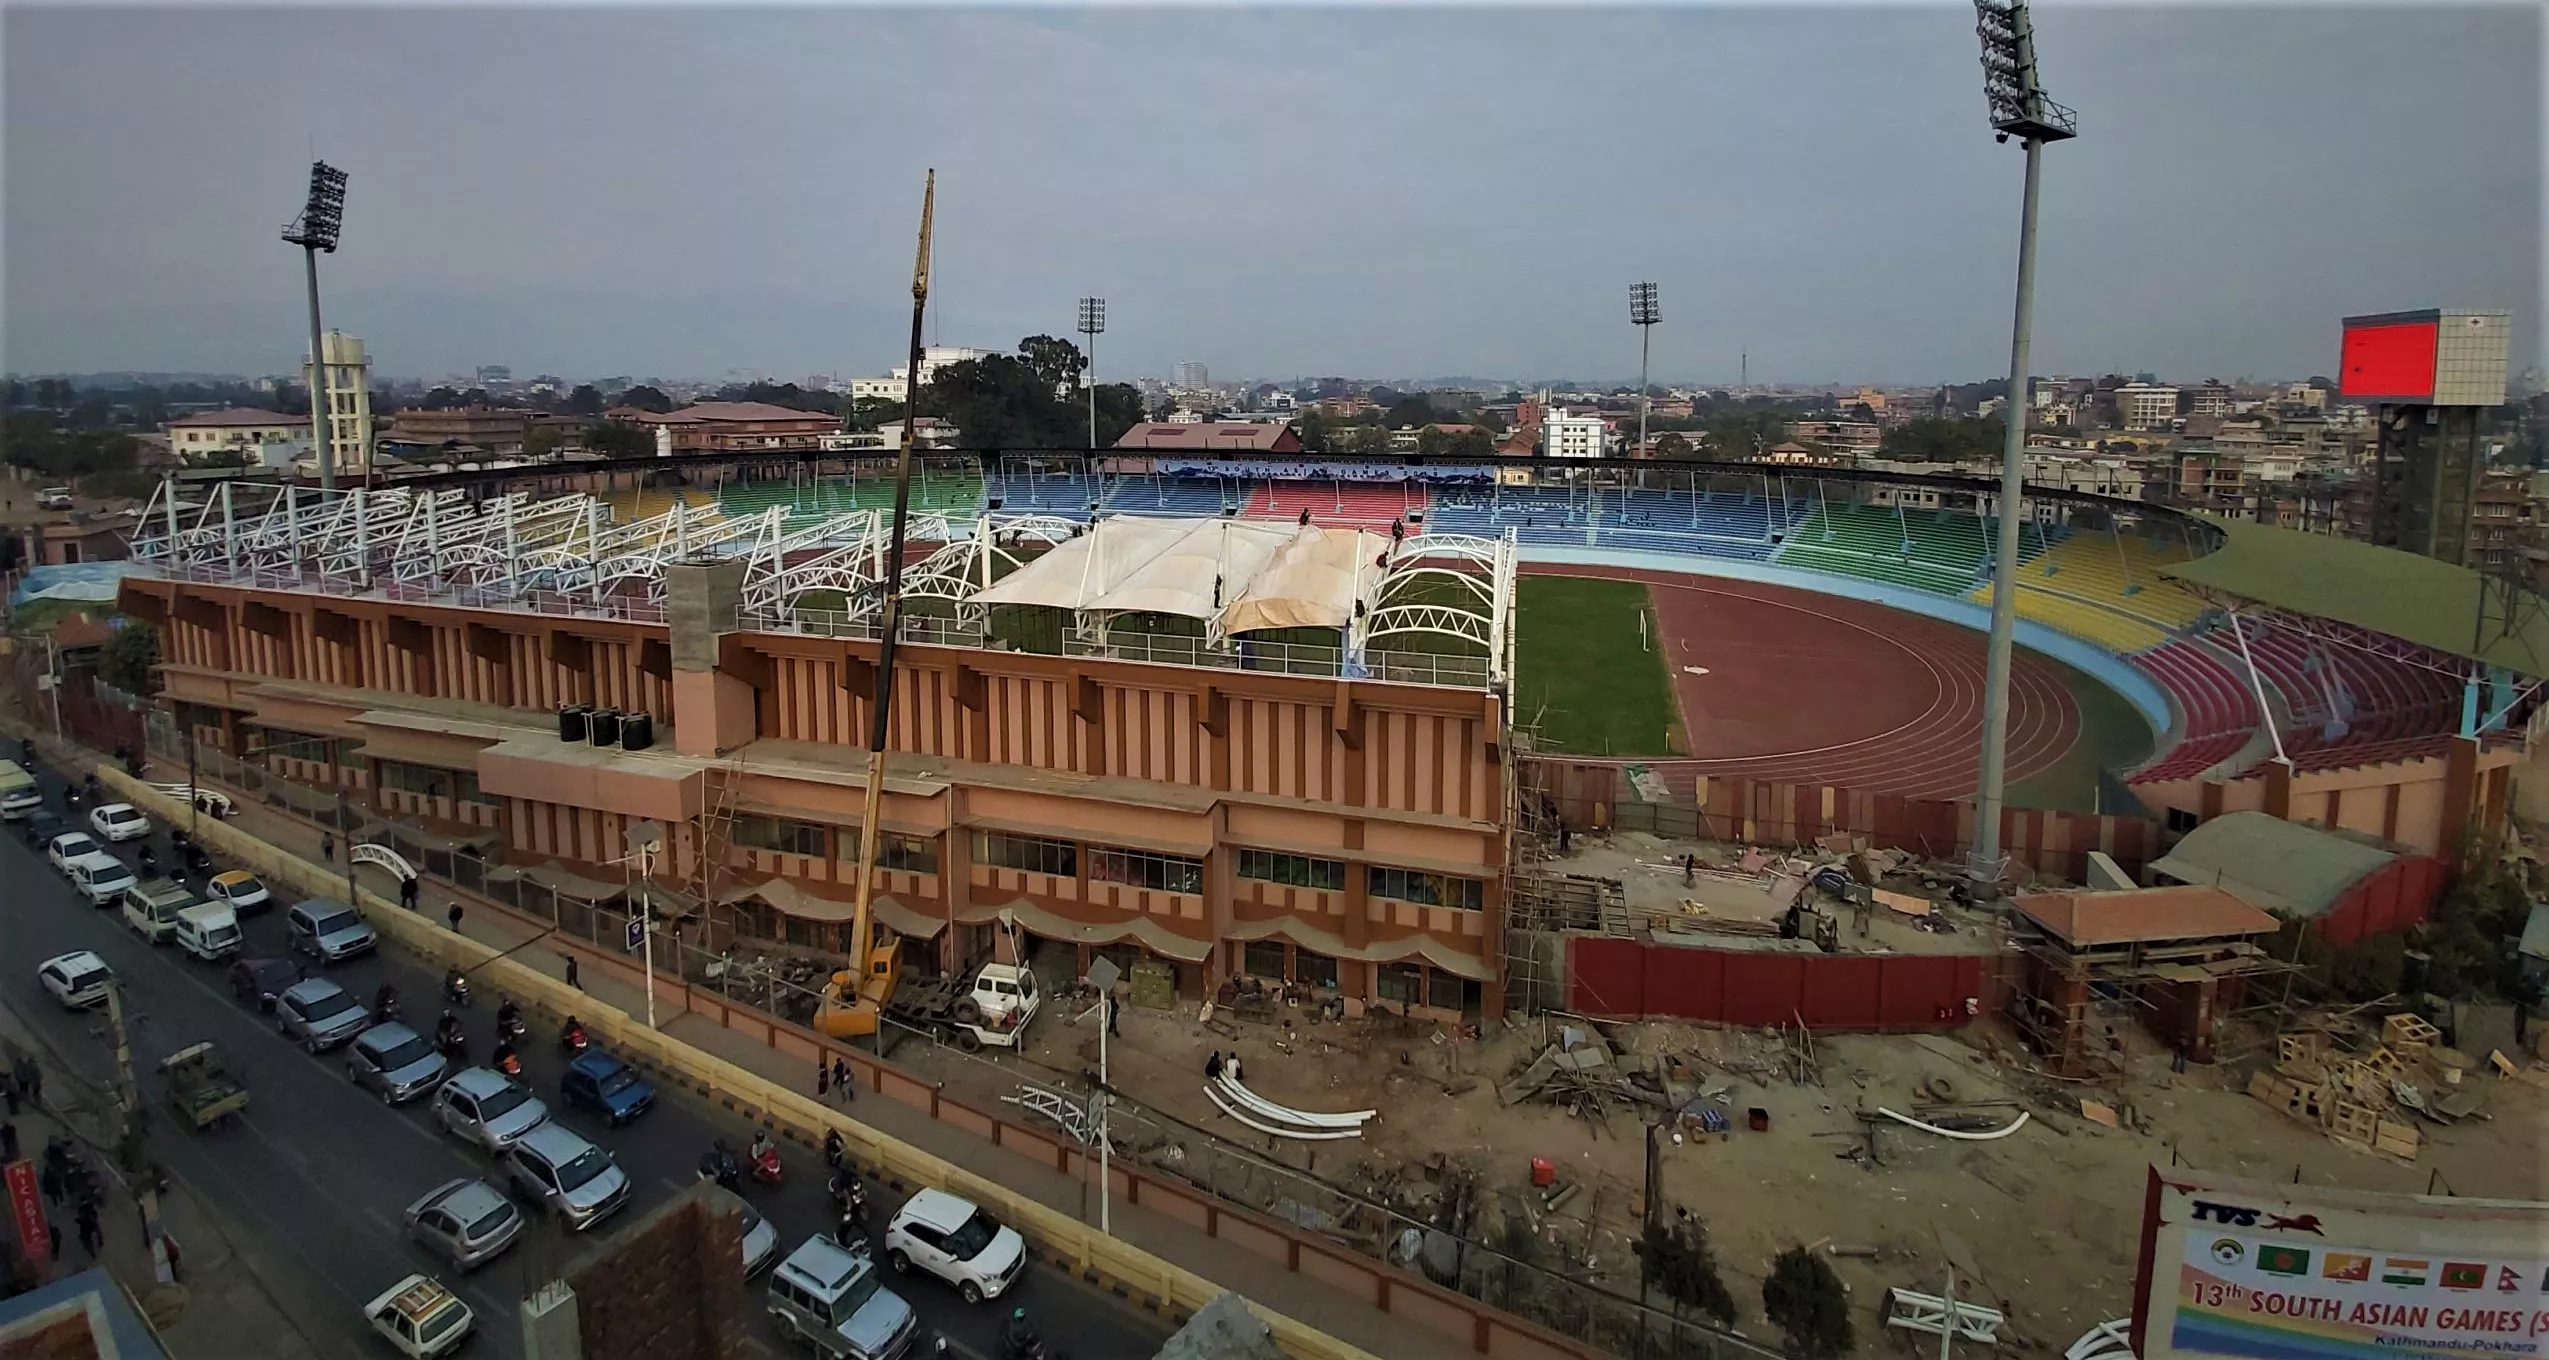 Dasharath Stadium Covered Hall in Nepal, Central Asia | Football,Volleyball,Ping-Pong - Rated 0.8